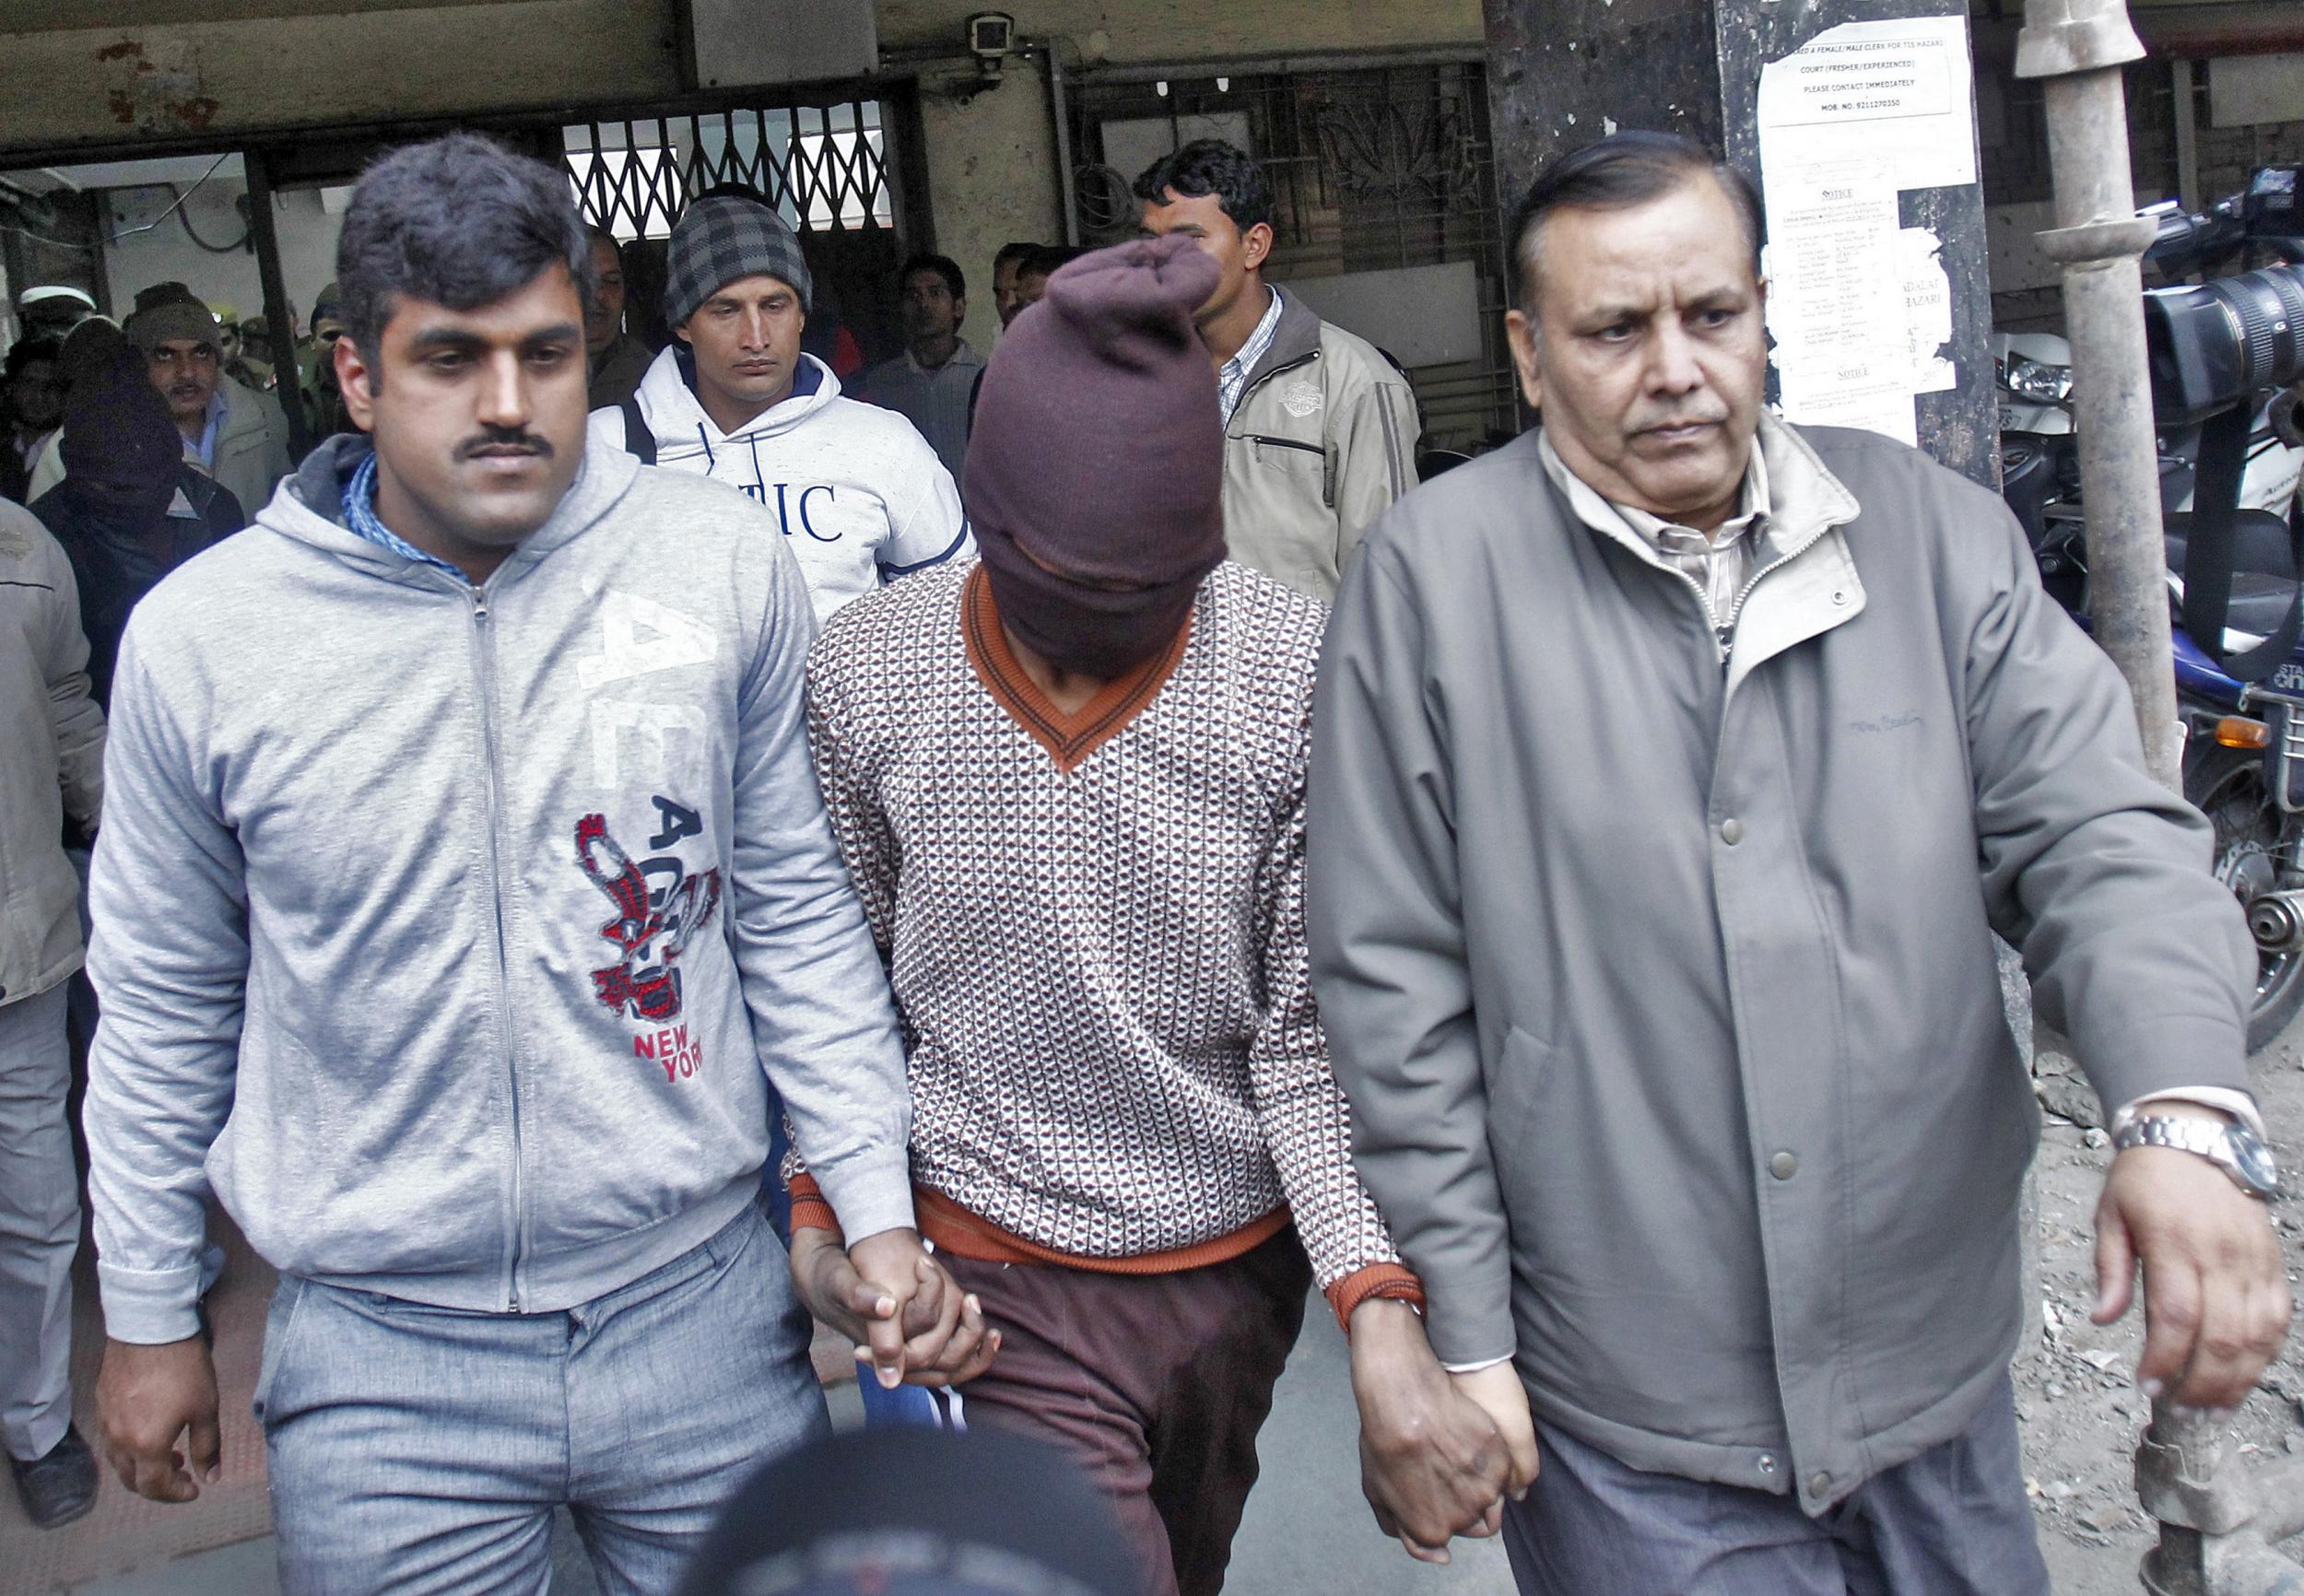 Plain-clothed police escort one of the men (face covered) accused of a gang rape outside a court in New Delhi